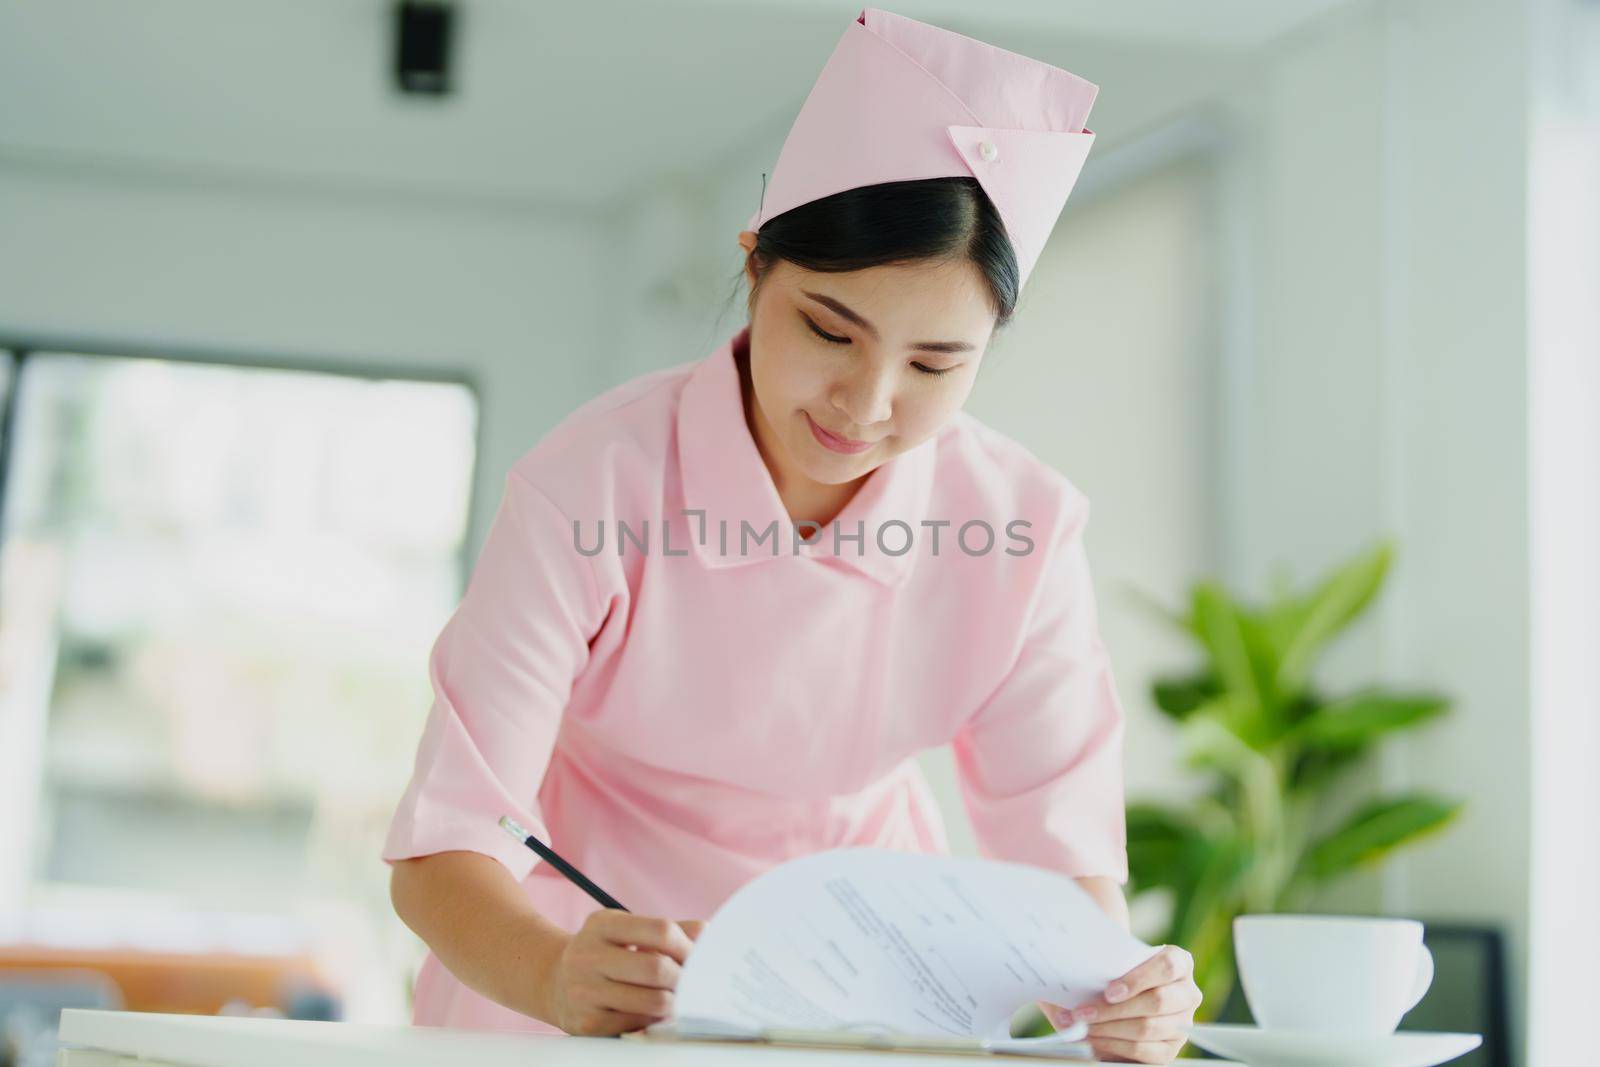 Portrait of a young Asian nurse looking at patient documents to analyze symptoms before sending them to the doctor for examination.